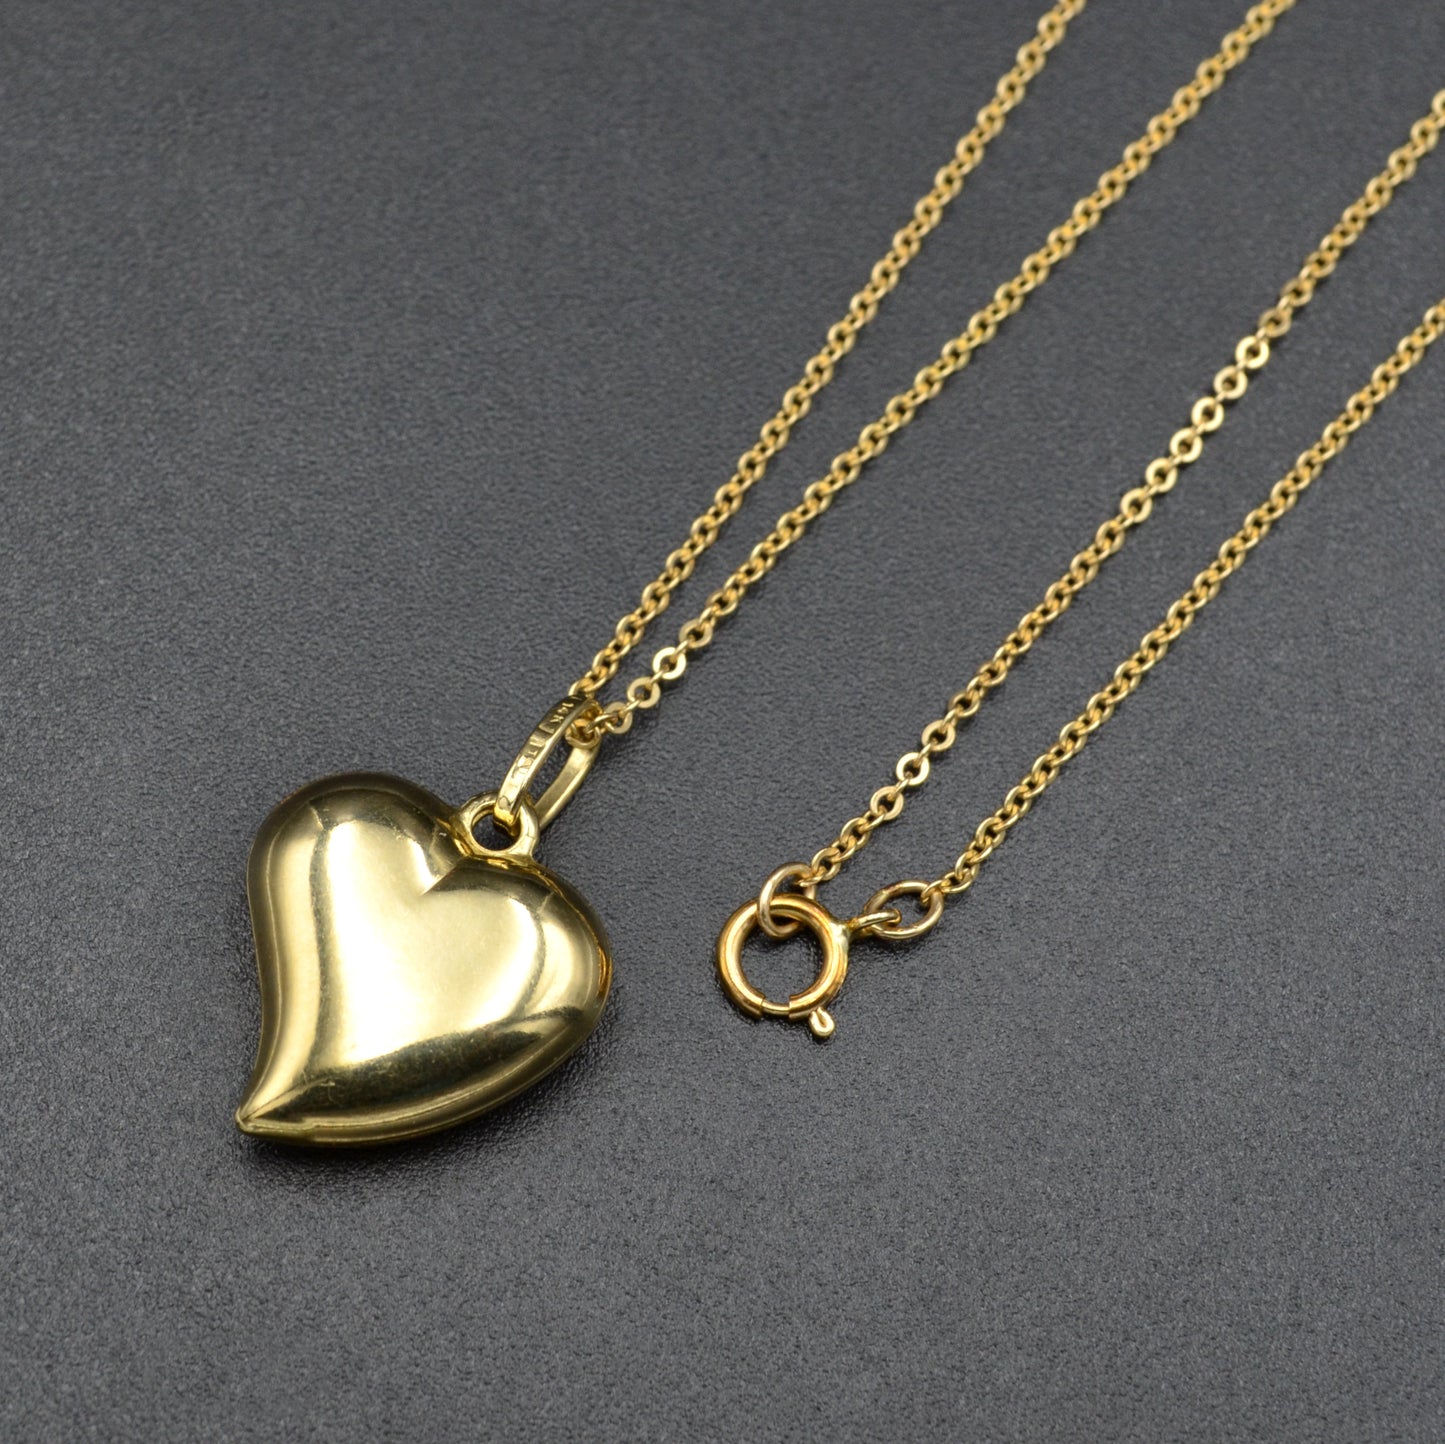 Vintage 14k Gold Luckenbooth Witches Heart Pendant Necklace